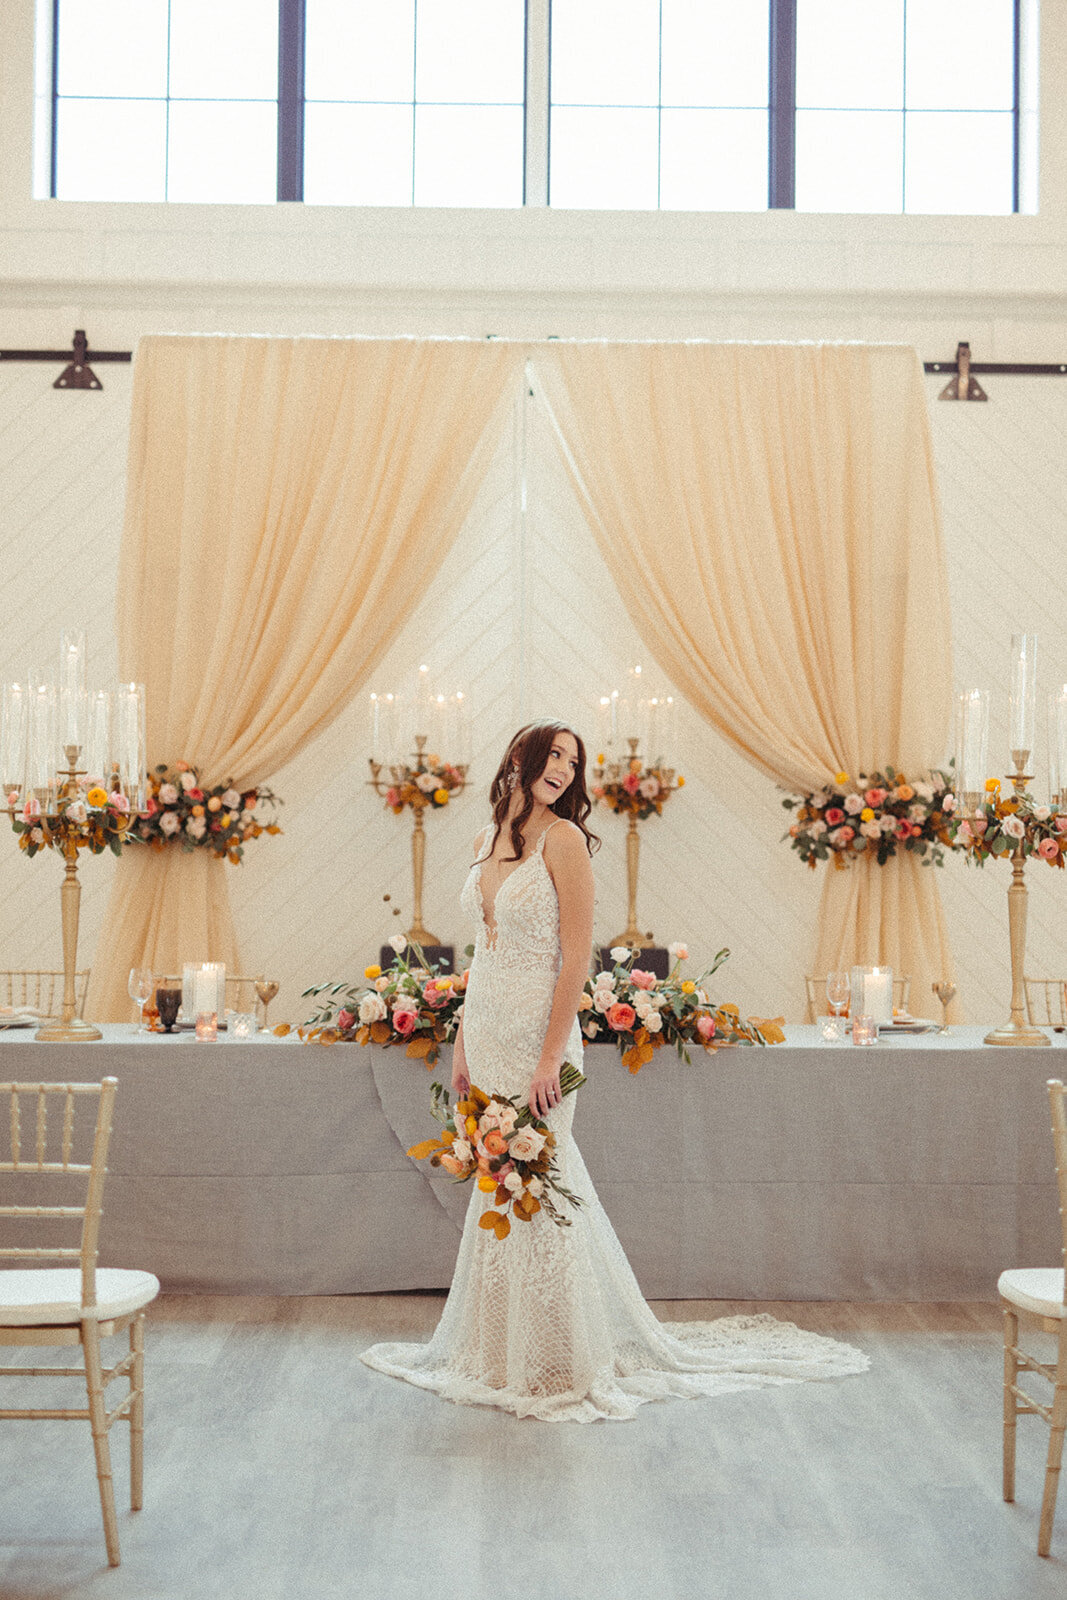 A bride wearing a white wedding gown holds a bouquet in front table with gray linen, candlesticks and flowers.